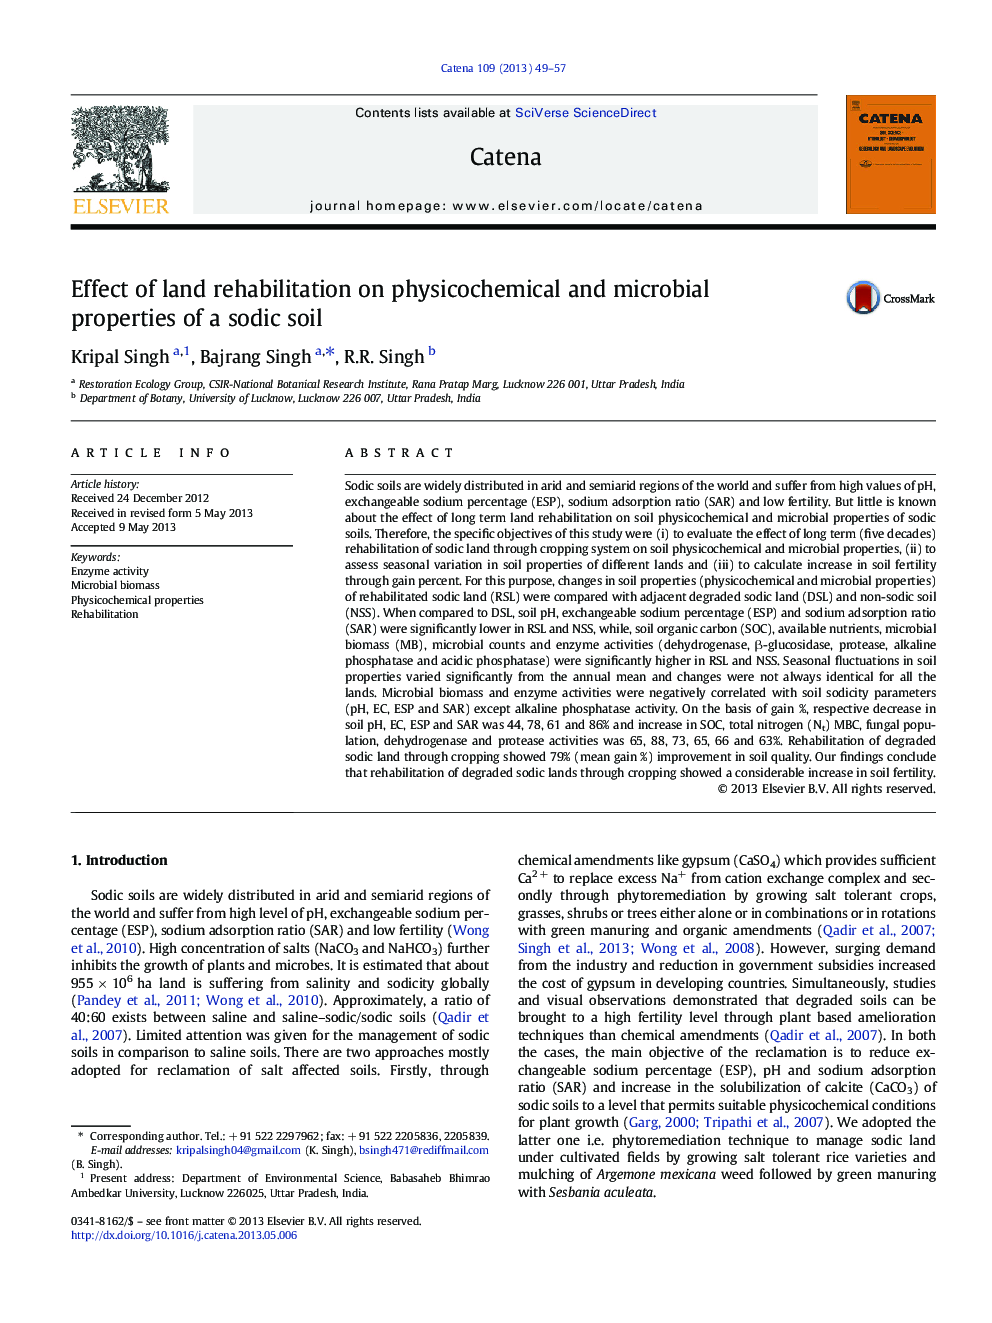 Effect of land rehabilitation on physicochemical and microbial properties of a sodic soil